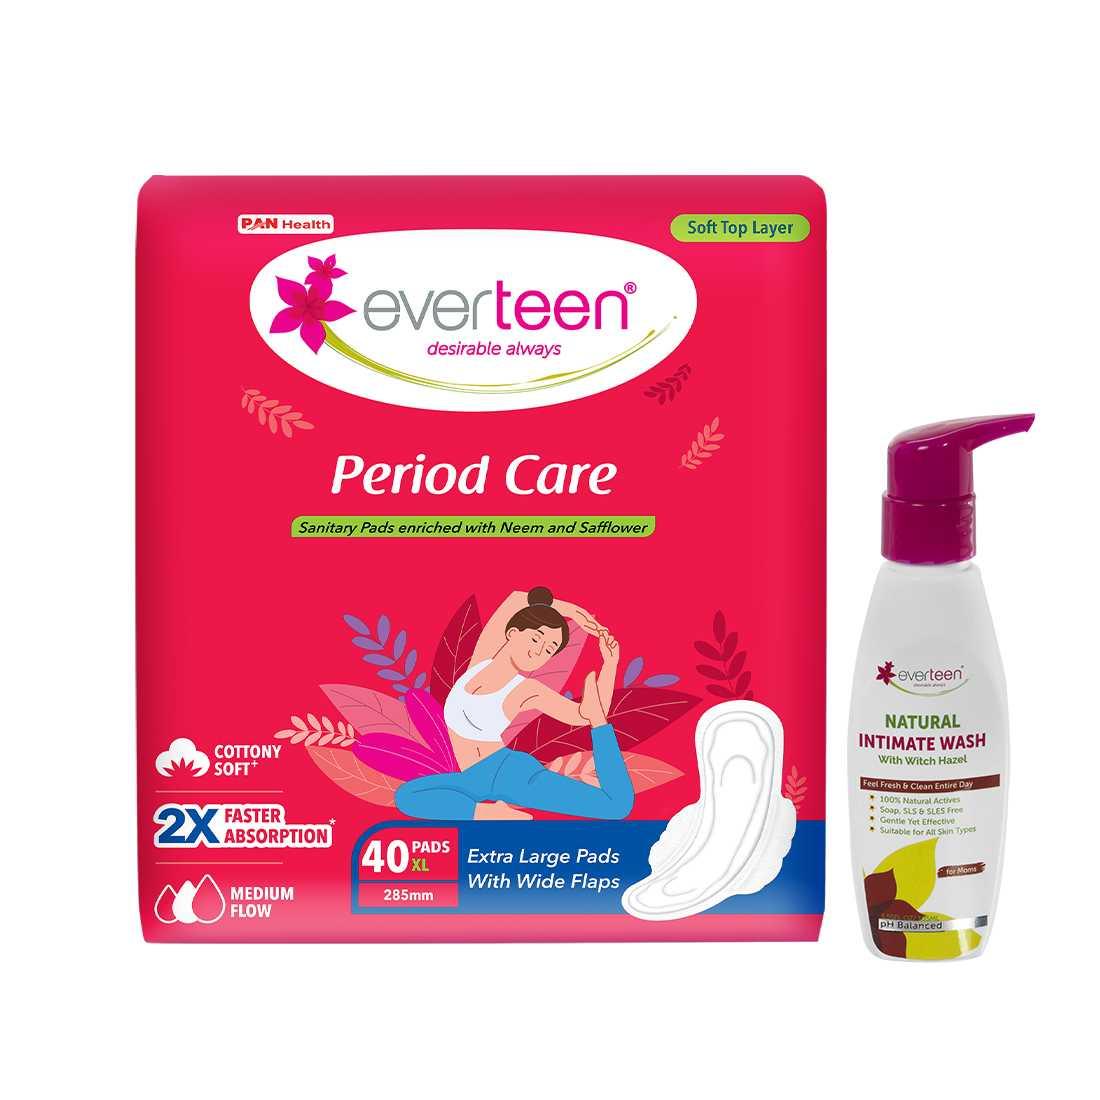 everteen Period Care XL Soft 40 Pads and Witch Hazel Intimate Wash 105ml 7419870431884